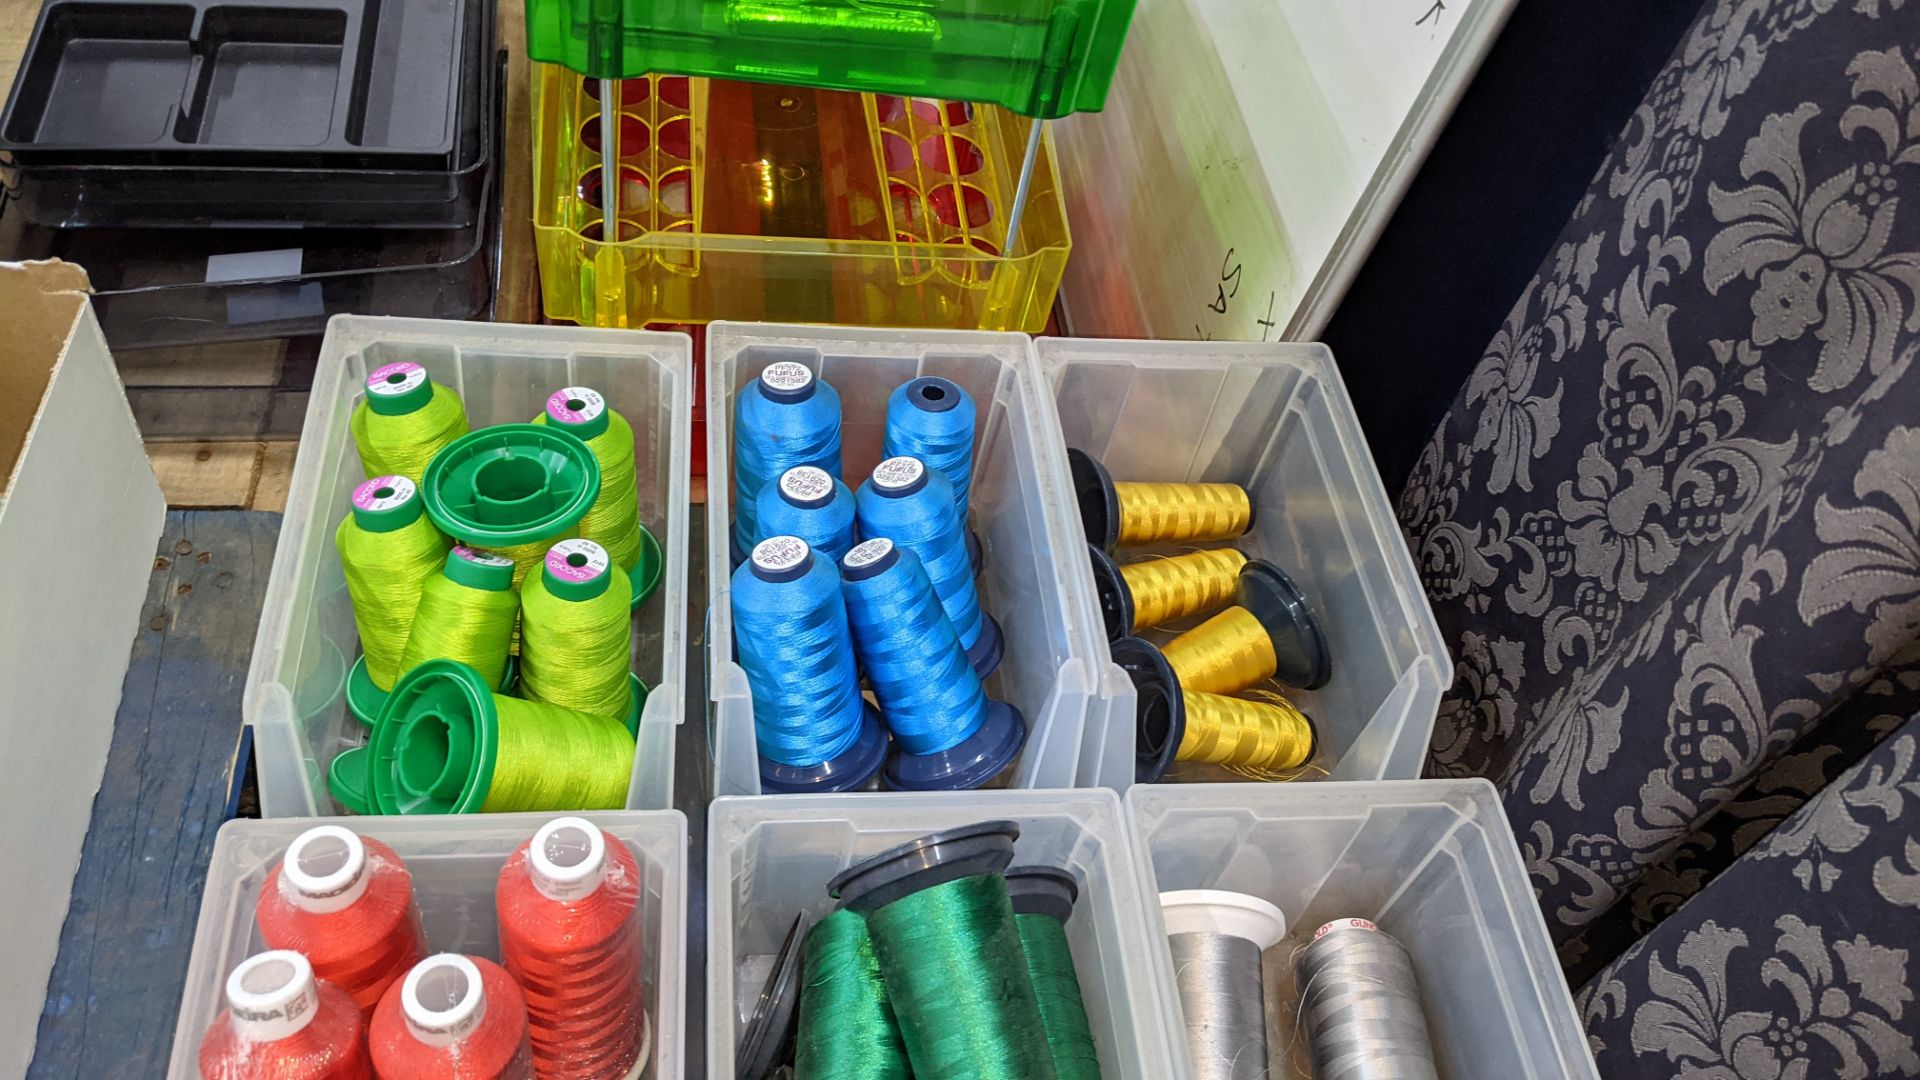 12 storage bins & their contents of embroidery thread - Image 6 of 6